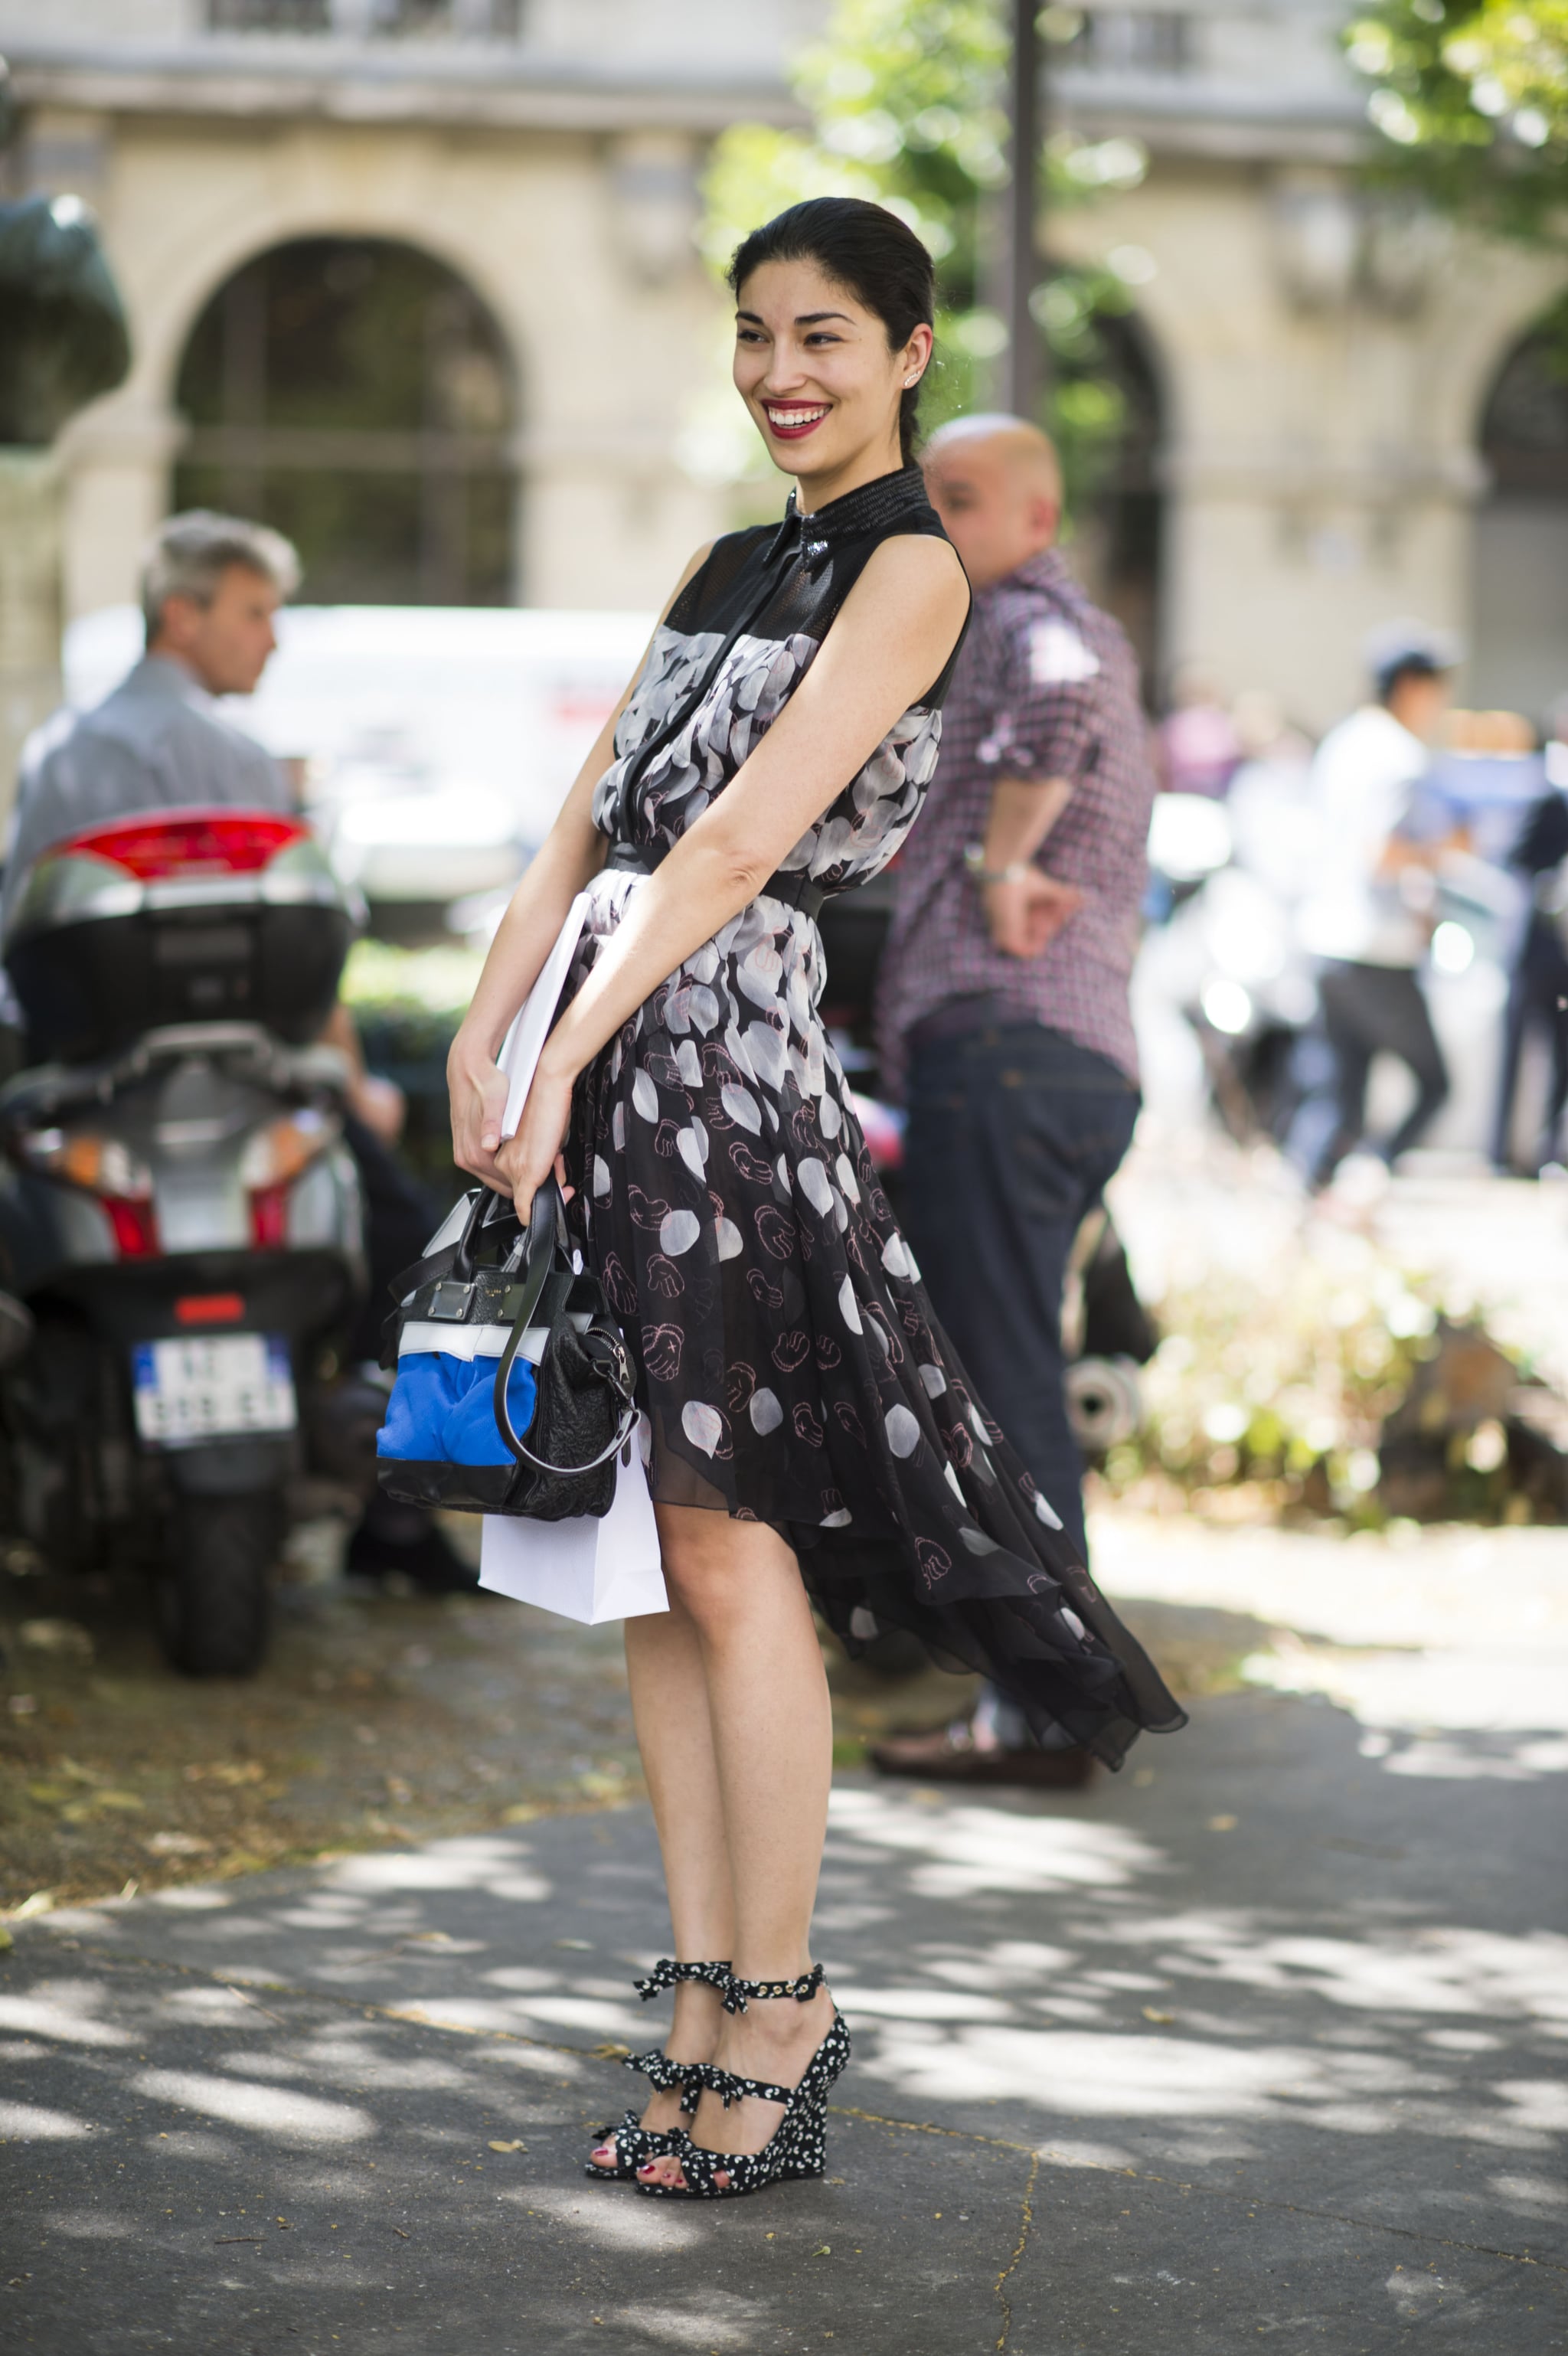 Street Style From One of the Last Remaining Summer Fridays